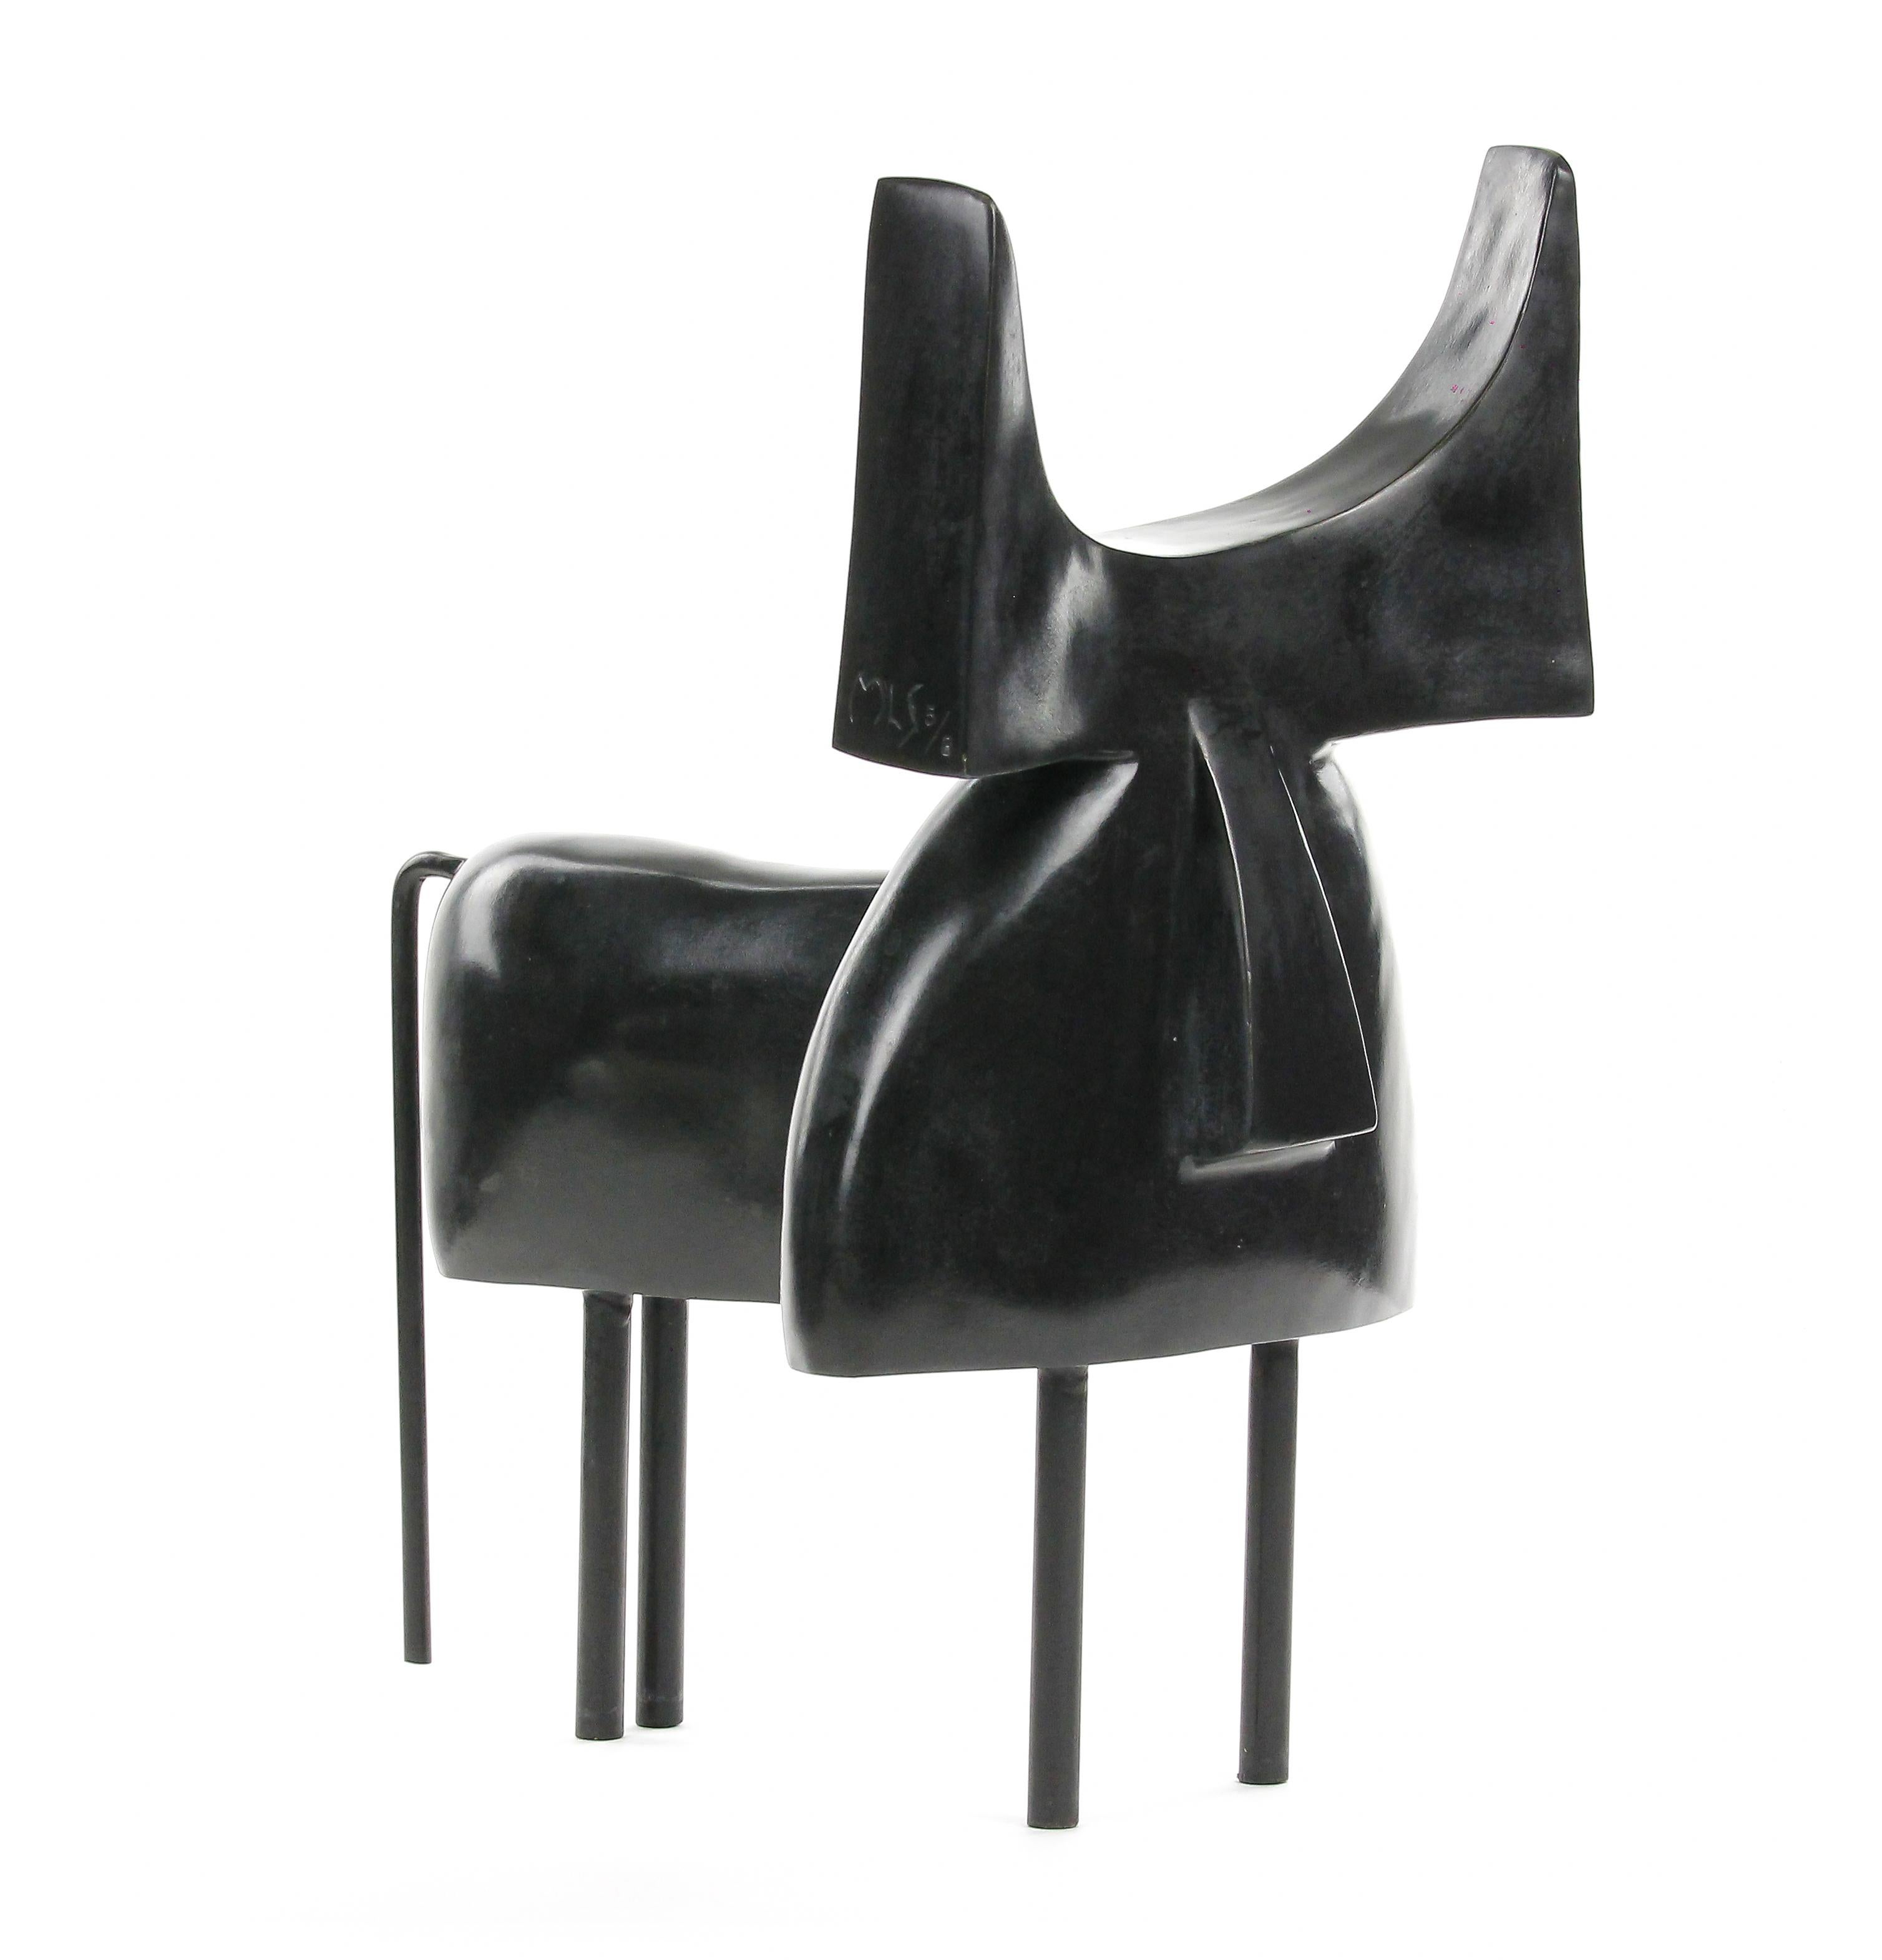 Pablo by Marie Louise Sorbac - Contemporary bronze sculpture, geometric bull For Sale 1